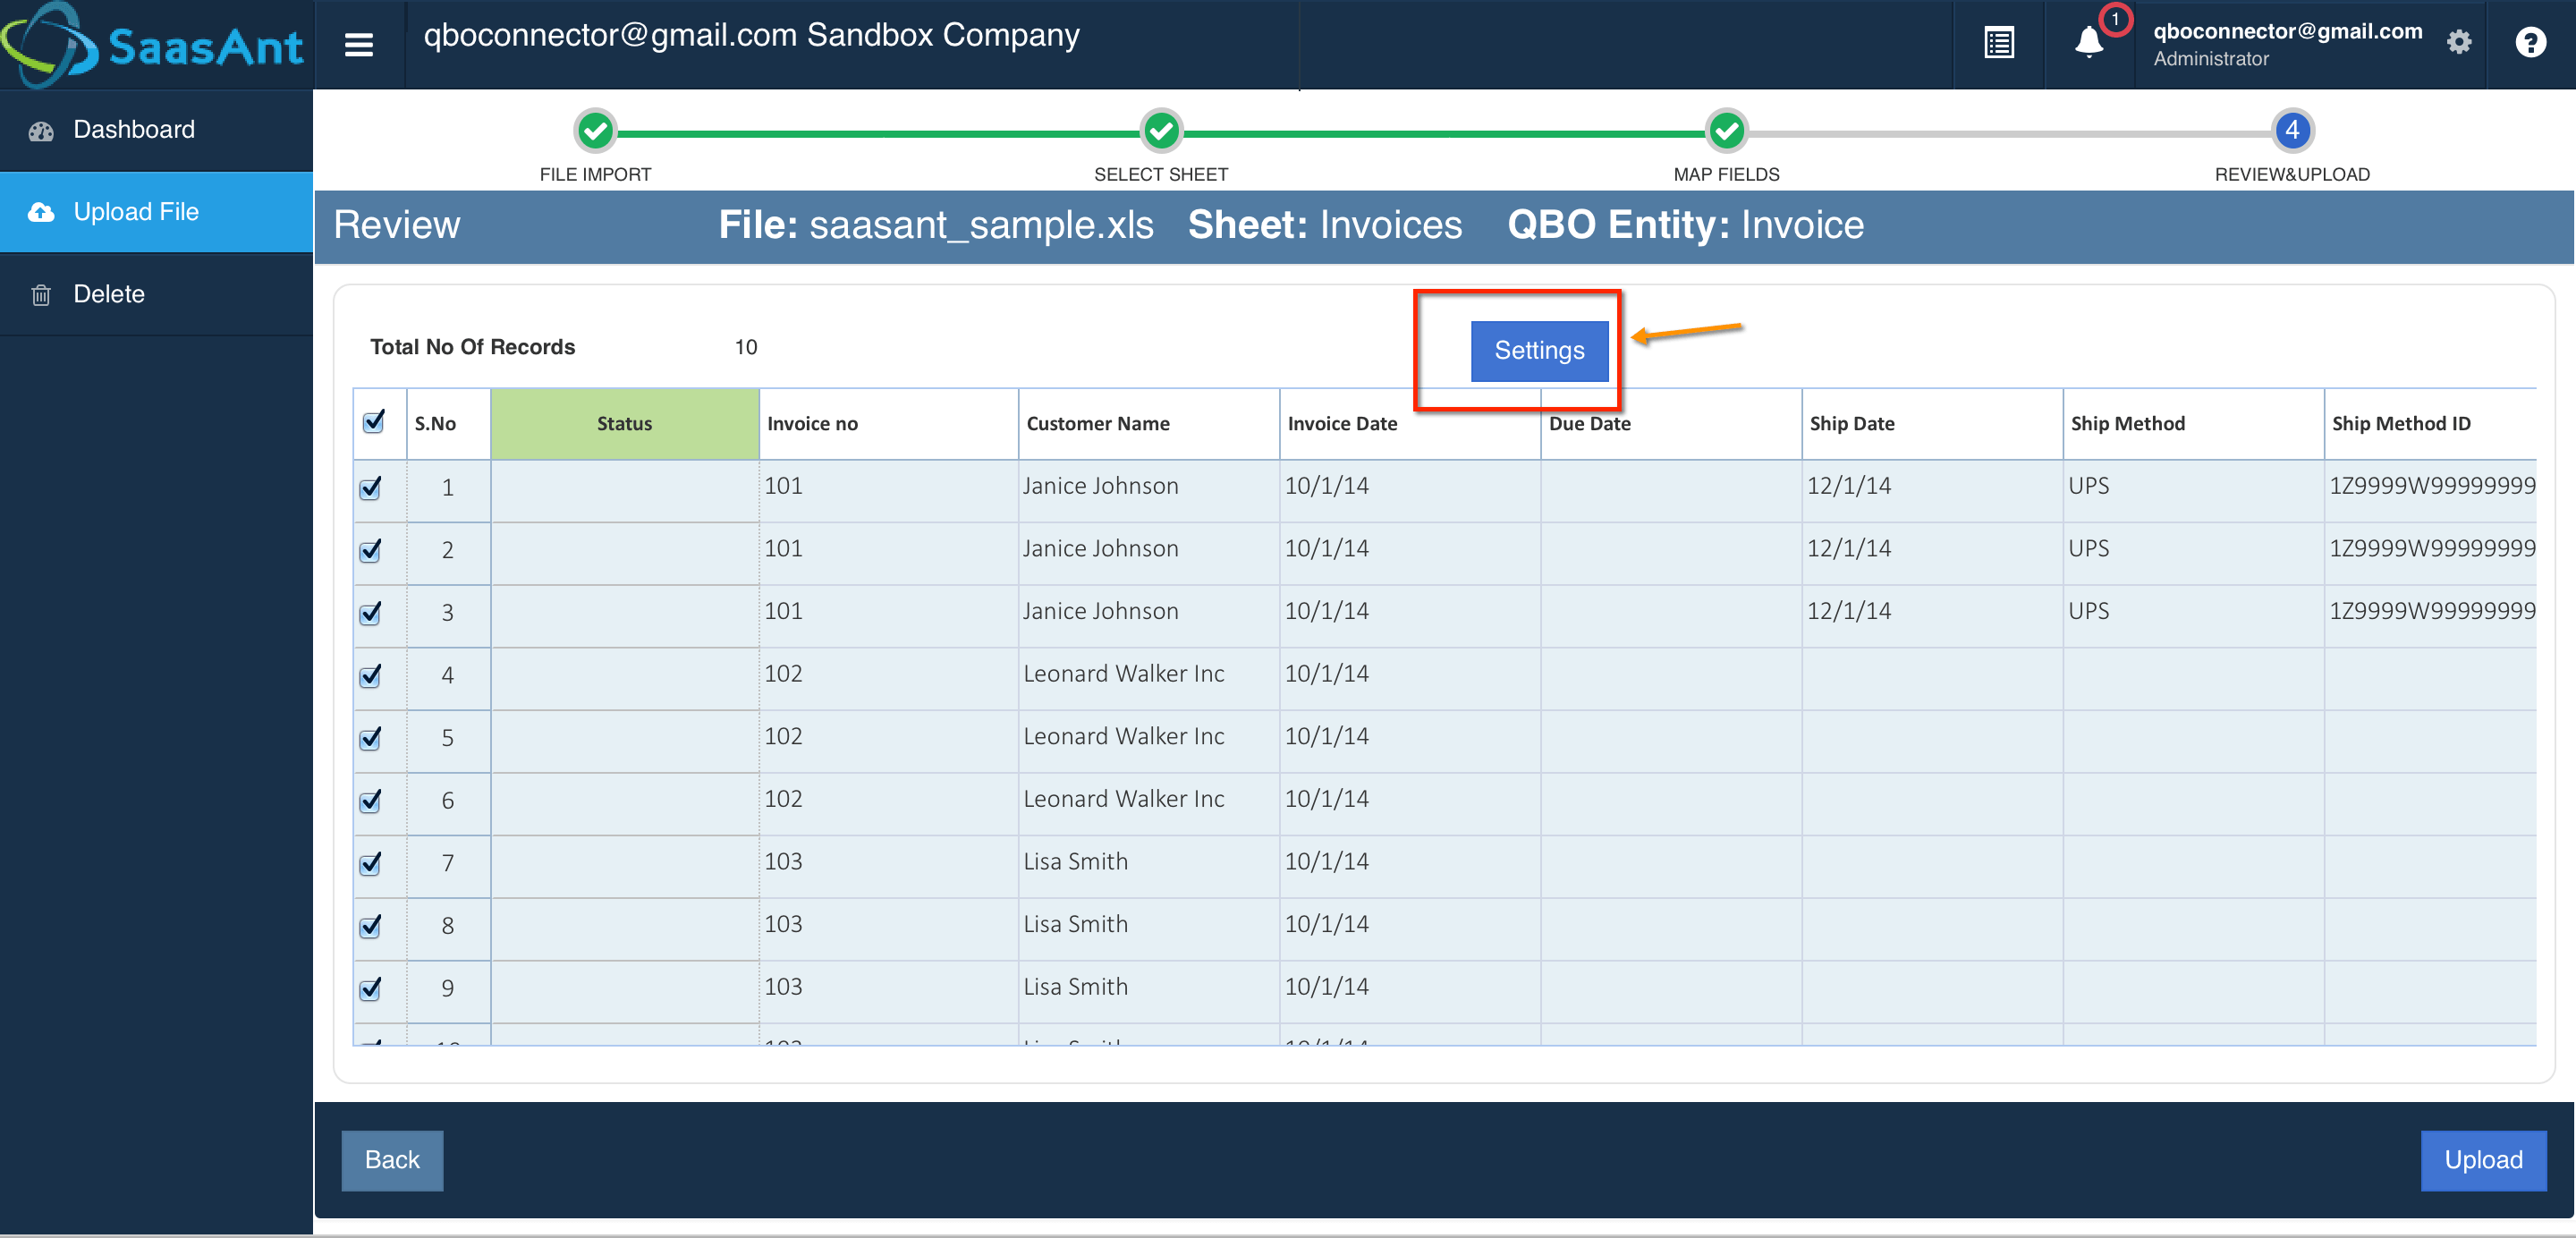 quickbooks invoice payment fees